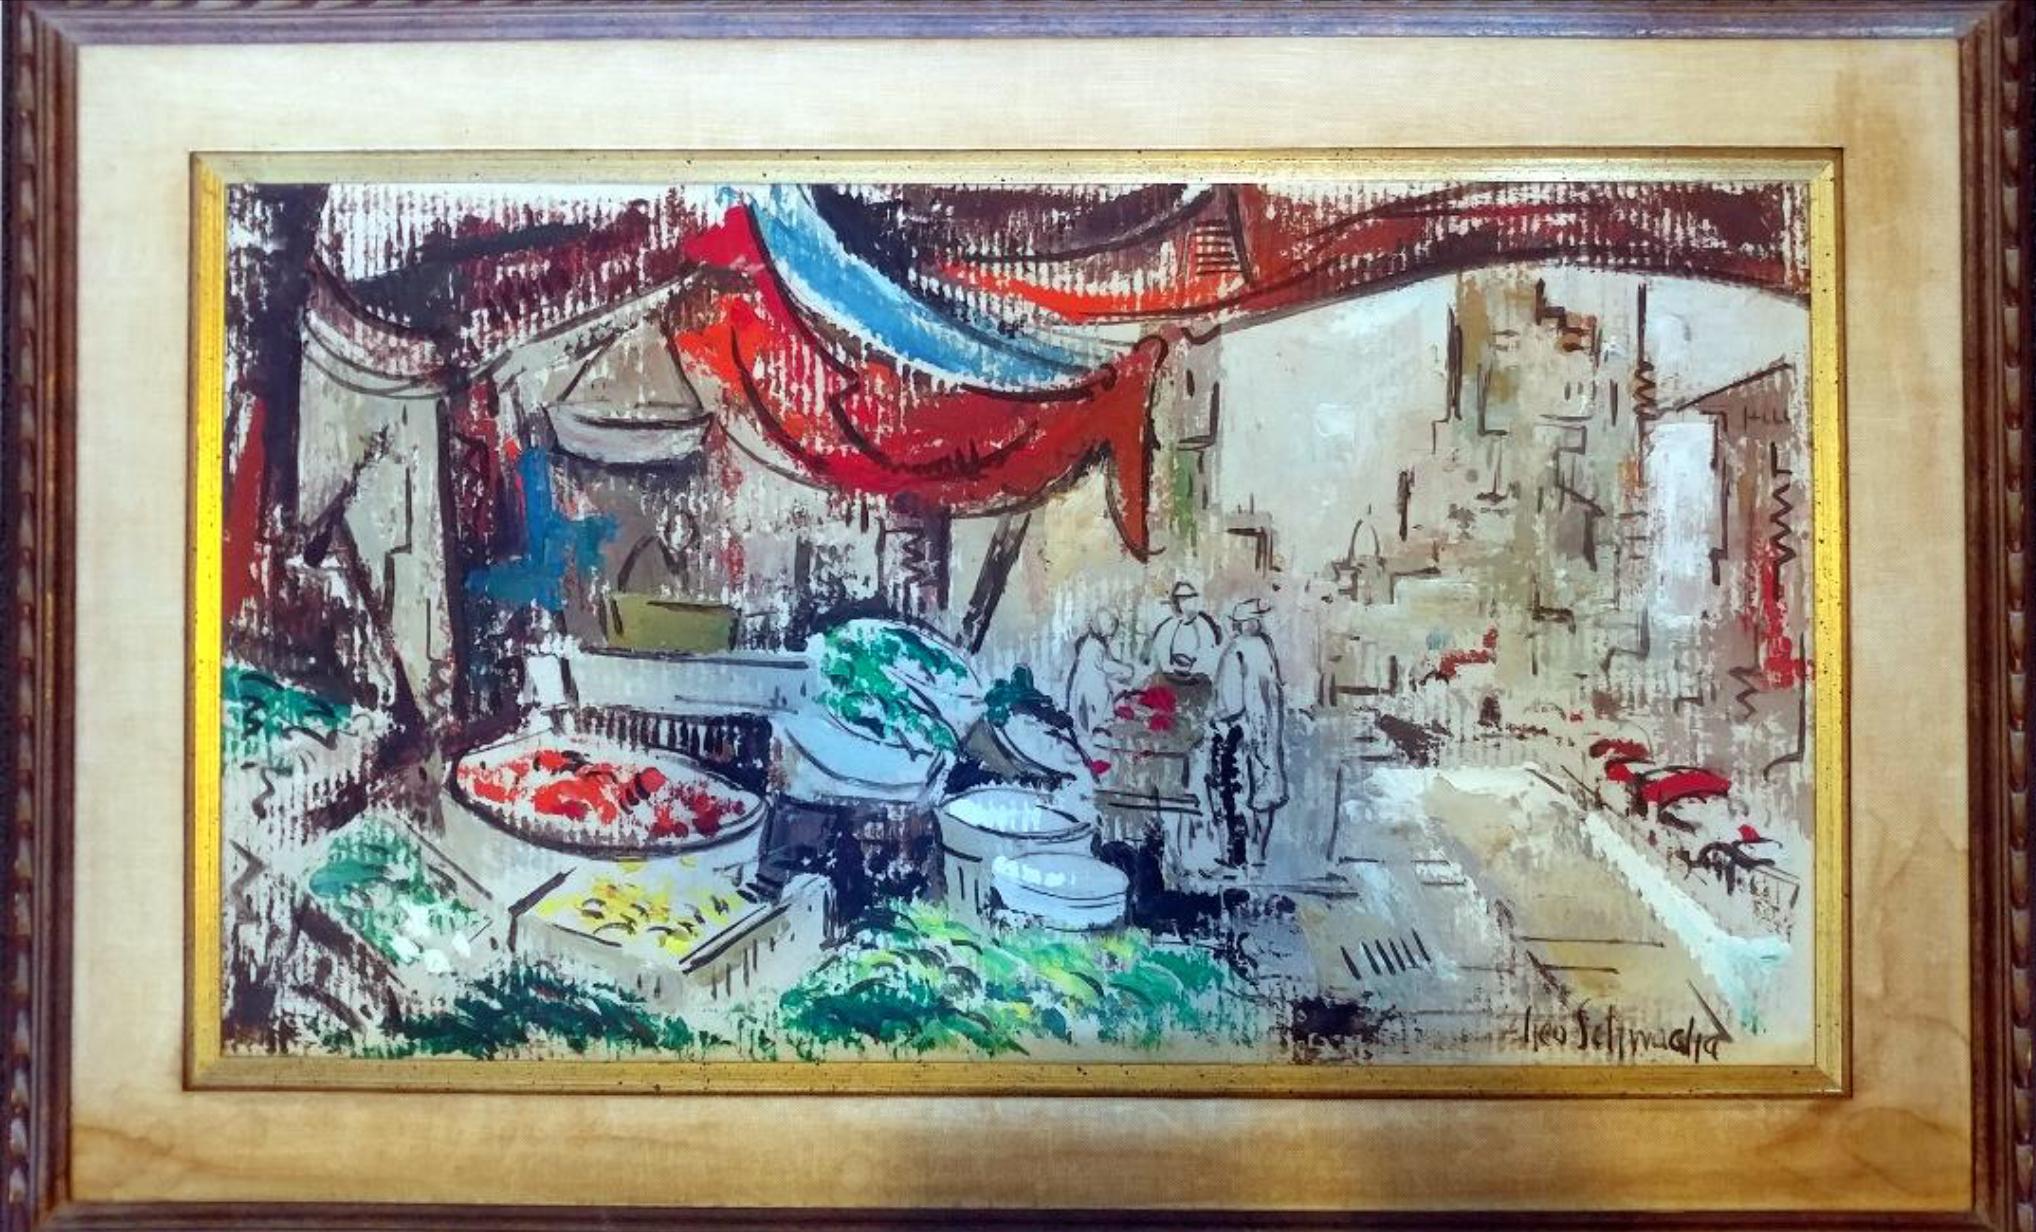 All original and authentic work by American artist George Schwacha.
Oil on board.
Depicts a market scene in the 1960s.
Artist hand signed and titled Paddy’s Market, on back.
Exhibit label by the gallery intact on back.
Original frame of the